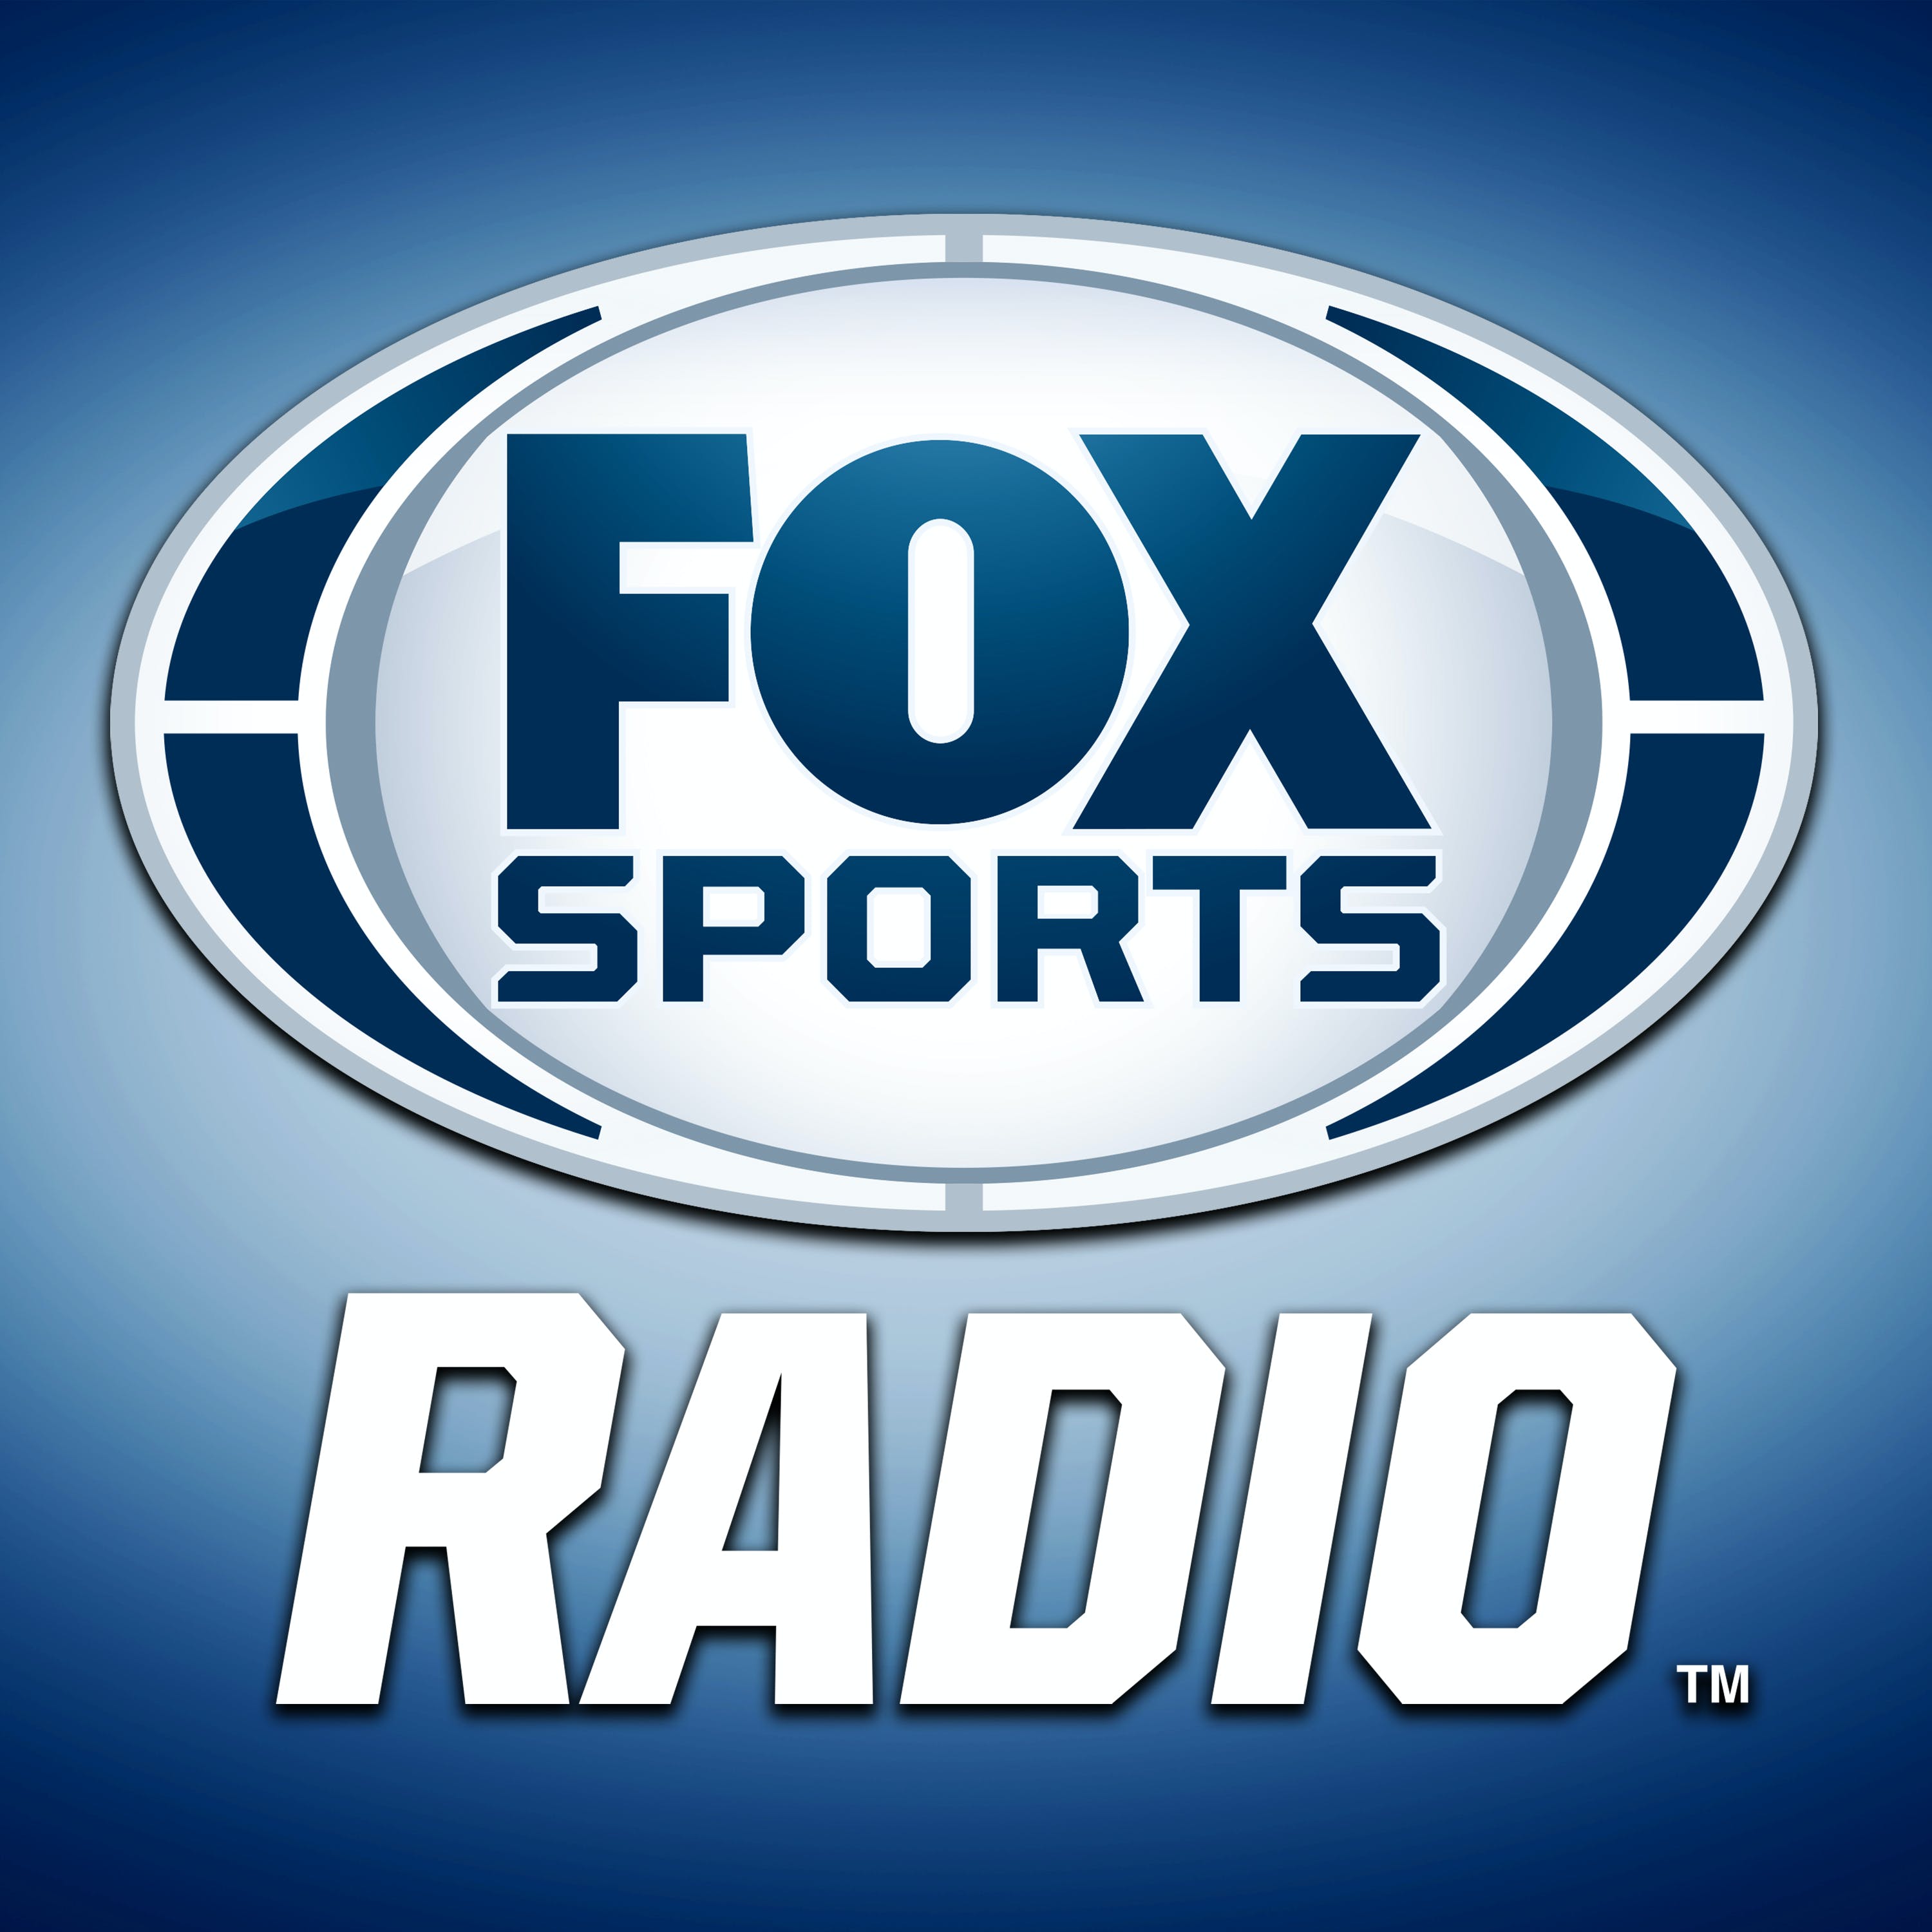 11/07/2020 - FOX Football Saturday with Arnie Spanier and Aaron Torres